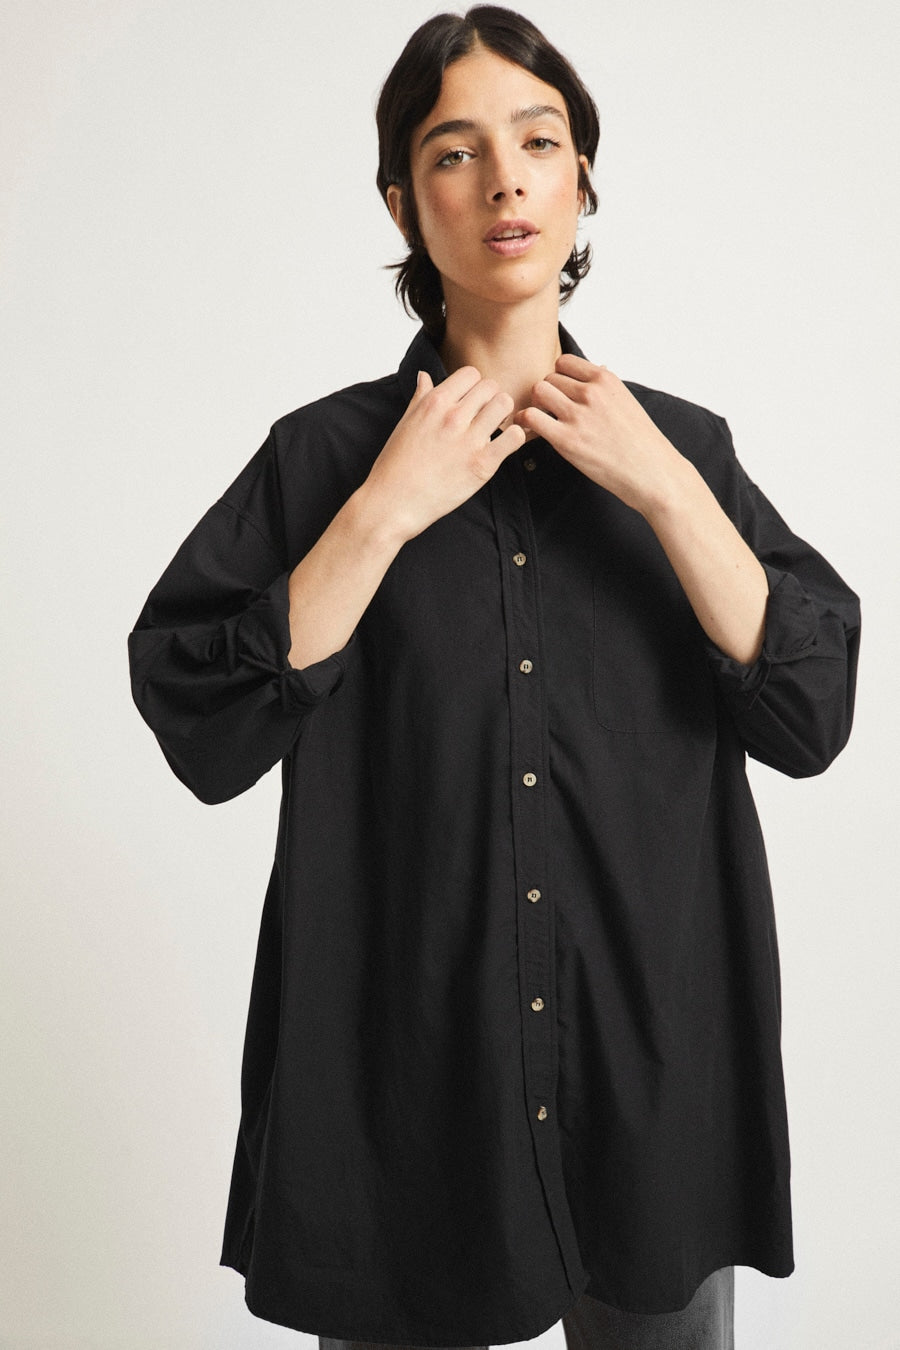 rita row morris shirt / Oversize shirt in cotton poplin fabric with a mandarin collar and classic placket. With long puffed sleeves and adjustable button cuffs.